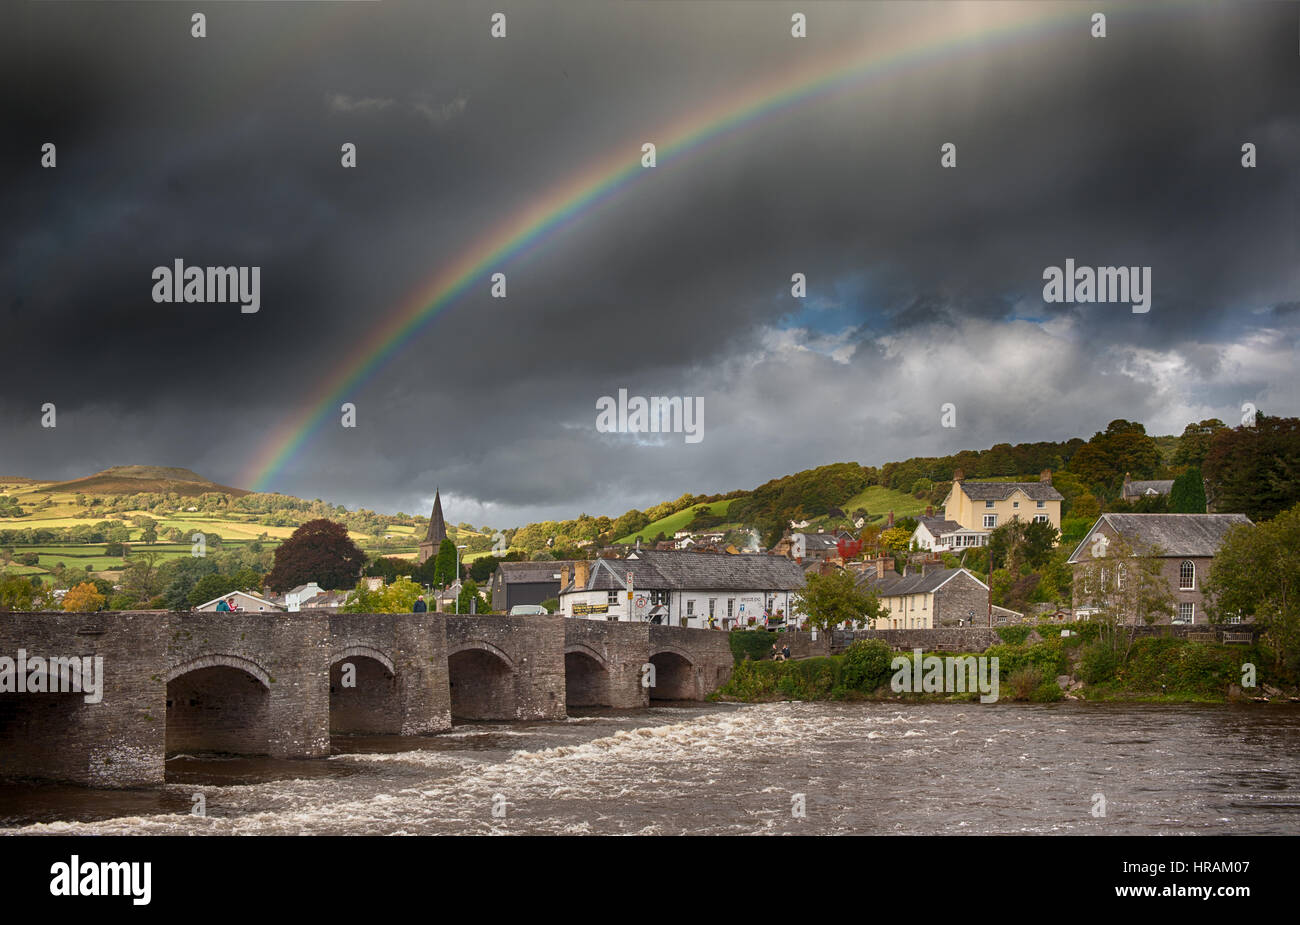 A rainbow over the River Usk at Crickhowell with Sugar Loaf in the Background, Brecon Beacons National Park, Wales UK Stock Photo